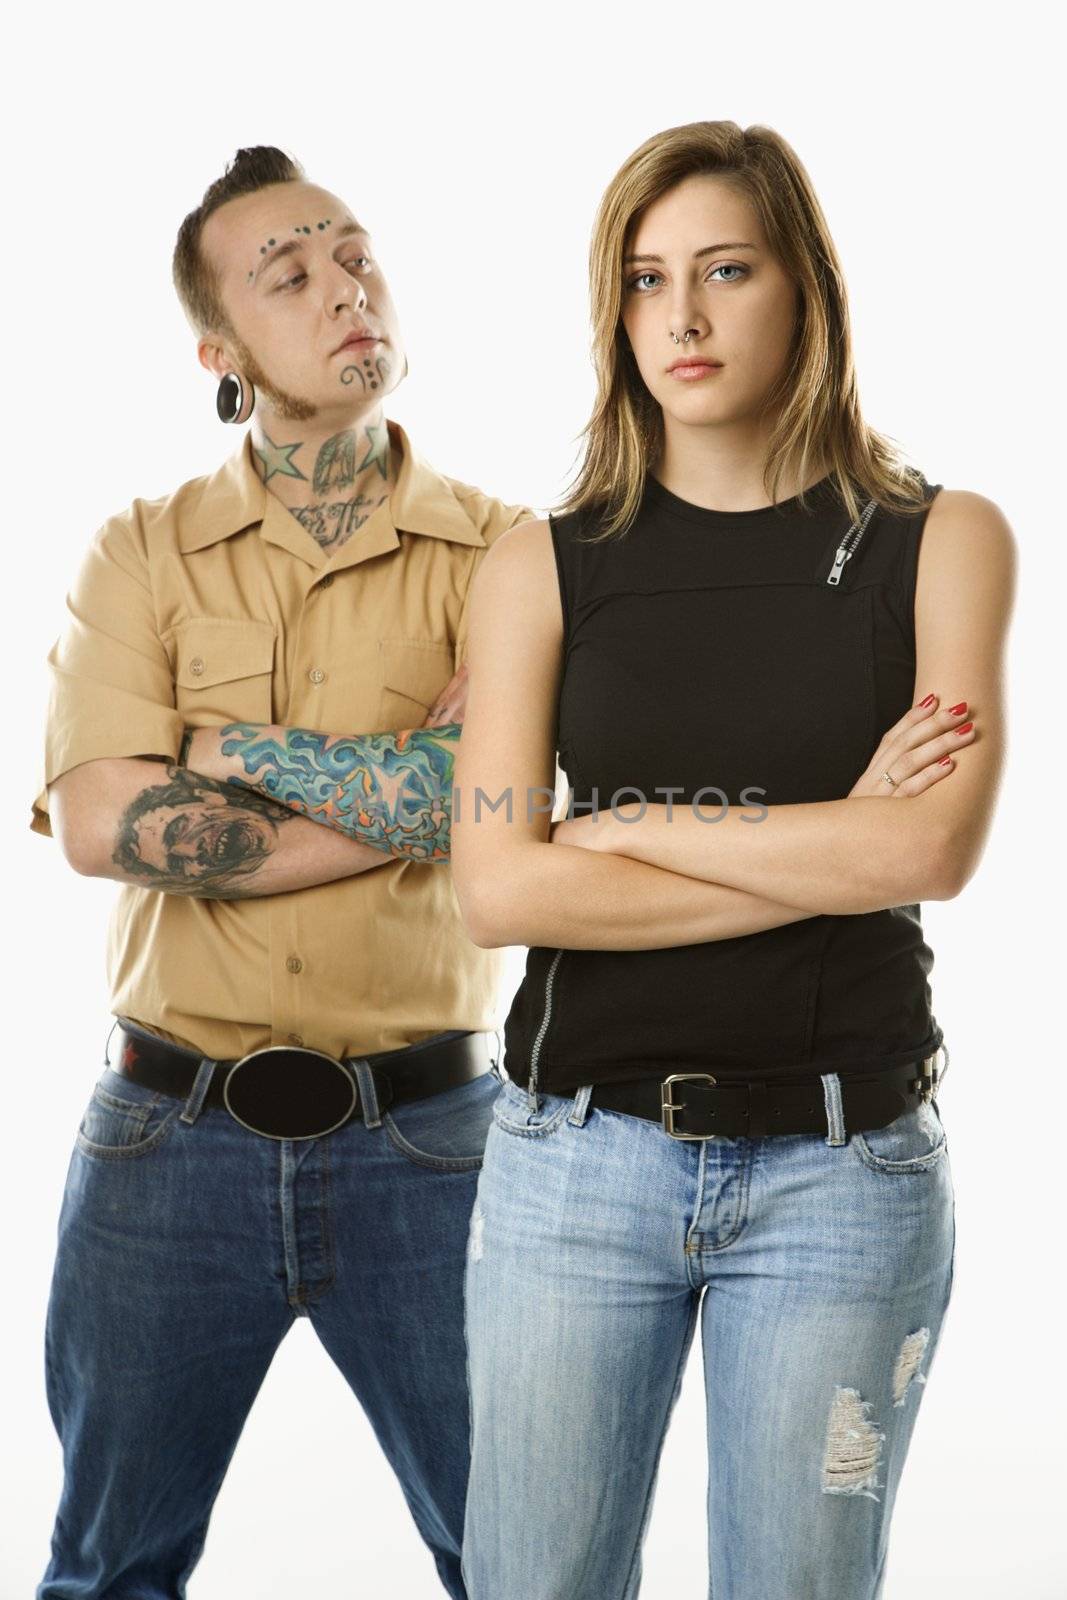 Caucasian mid-adult man looking at teen female who is looking away.